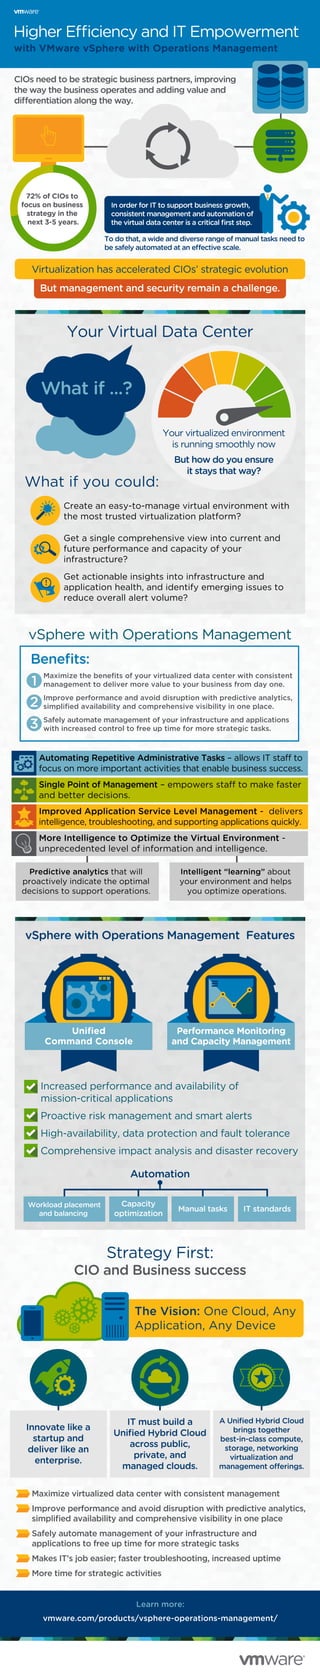 with VMware vSphere with Operations Management
Higher Efficiency and IT Empowerment
Your Virtual Data Center
Strategy First:
CIO and Business success
vSphere with Operations Management Features
Automation
vSphere with Operations Management
Maximize the beneﬁts of your virtualized data center with consistent
management to deliver more value to your business from day one.
Improve performance and avoid disruption with predictive analytics,
simpliﬁed availability and comprehensive visibility in one place.
Safely automate management of your infrastructure and applications
with increased control to free up time for more strategic tasks.
What if you could:
Beneﬁts:
Increased performance and availability of
mission-critical applications
Proactive risk management and smart alerts
High-availability, data protection and fault tolerance
Comprehensive impact analysis and disaster recovery
Create an easy-to-manage virtual environment with
the most trusted virtualization platform?
Get a single comprehensive view into current and
future performance and capacity of your
infrastructure?
Get actionable insights into infrastructure and
application health, and identify emerging issues to
reduce overall alert volume?
Automating Repetitive Administrative Tasks – allows IT staff to
focus on more important activities that enable business success.
Single Point of Management – empowers staff to make faster
and better decisions.
Improved Application Service Level Management - delivers
intelligence, troubleshooting, and supporting applications quickly.
More Intelligence to Optimize the Virtual Environment -
unprecedented level of information and intelligence.
CIOs need to be strategic business partners, improving
the way the business operates and adding value and
differentiation along the way.
To do that, a wide and diverse range of manual tasks need to
be safely automated at an effective scale.
Your virtualized environment
is running smoothly now
But how do you ensure
it stays that way?
In order for IT to support business growth,
consistent management and automation of
the virtual data center is a critical ﬁrst step.
The Vision: One Cloud, Any
Application, Any Device
Maximize virtualized data center with consistent management
Improve performance and avoid disruption with predictive analytics,
simpliﬁed availability and comprehensive visibility in one place
Safely automate management of your infrastructure and
applications to free up time for more strategic tasks
Makes IT’s job easier; faster troubleshooting, increased uptime
More time for strategic activities
Learn more:
vmware.com/products/vsphere-operations-management/
72% of CIOs to
focus on business
strategy in the
next 3-5 years.
Virtualization has accelerated CIOs’ strategic evolution
But management and security remain a challenge.
What if ...?
1
2
3
Predictive analytics that will
proactively indicate the optimal
decisions to support operations.
Intelligent “learning” about
your environment and helps
you optimize operations.
Performance Monitoring
and Capacity Management
Workload placement
and balancing
Capacity
optimization
Manual tasks IT standards
A Uniﬁed Hybrid Cloud
brings together
best-in-class compute,
storage, networking
virtualization and
management offerings.
IT must build a
Uniﬁed Hybrid Cloud
across public,
private, and
managed clouds.
Innovate like a
startup and
deliver like an
enterprise.
!
Uniﬁed
Command Console
 